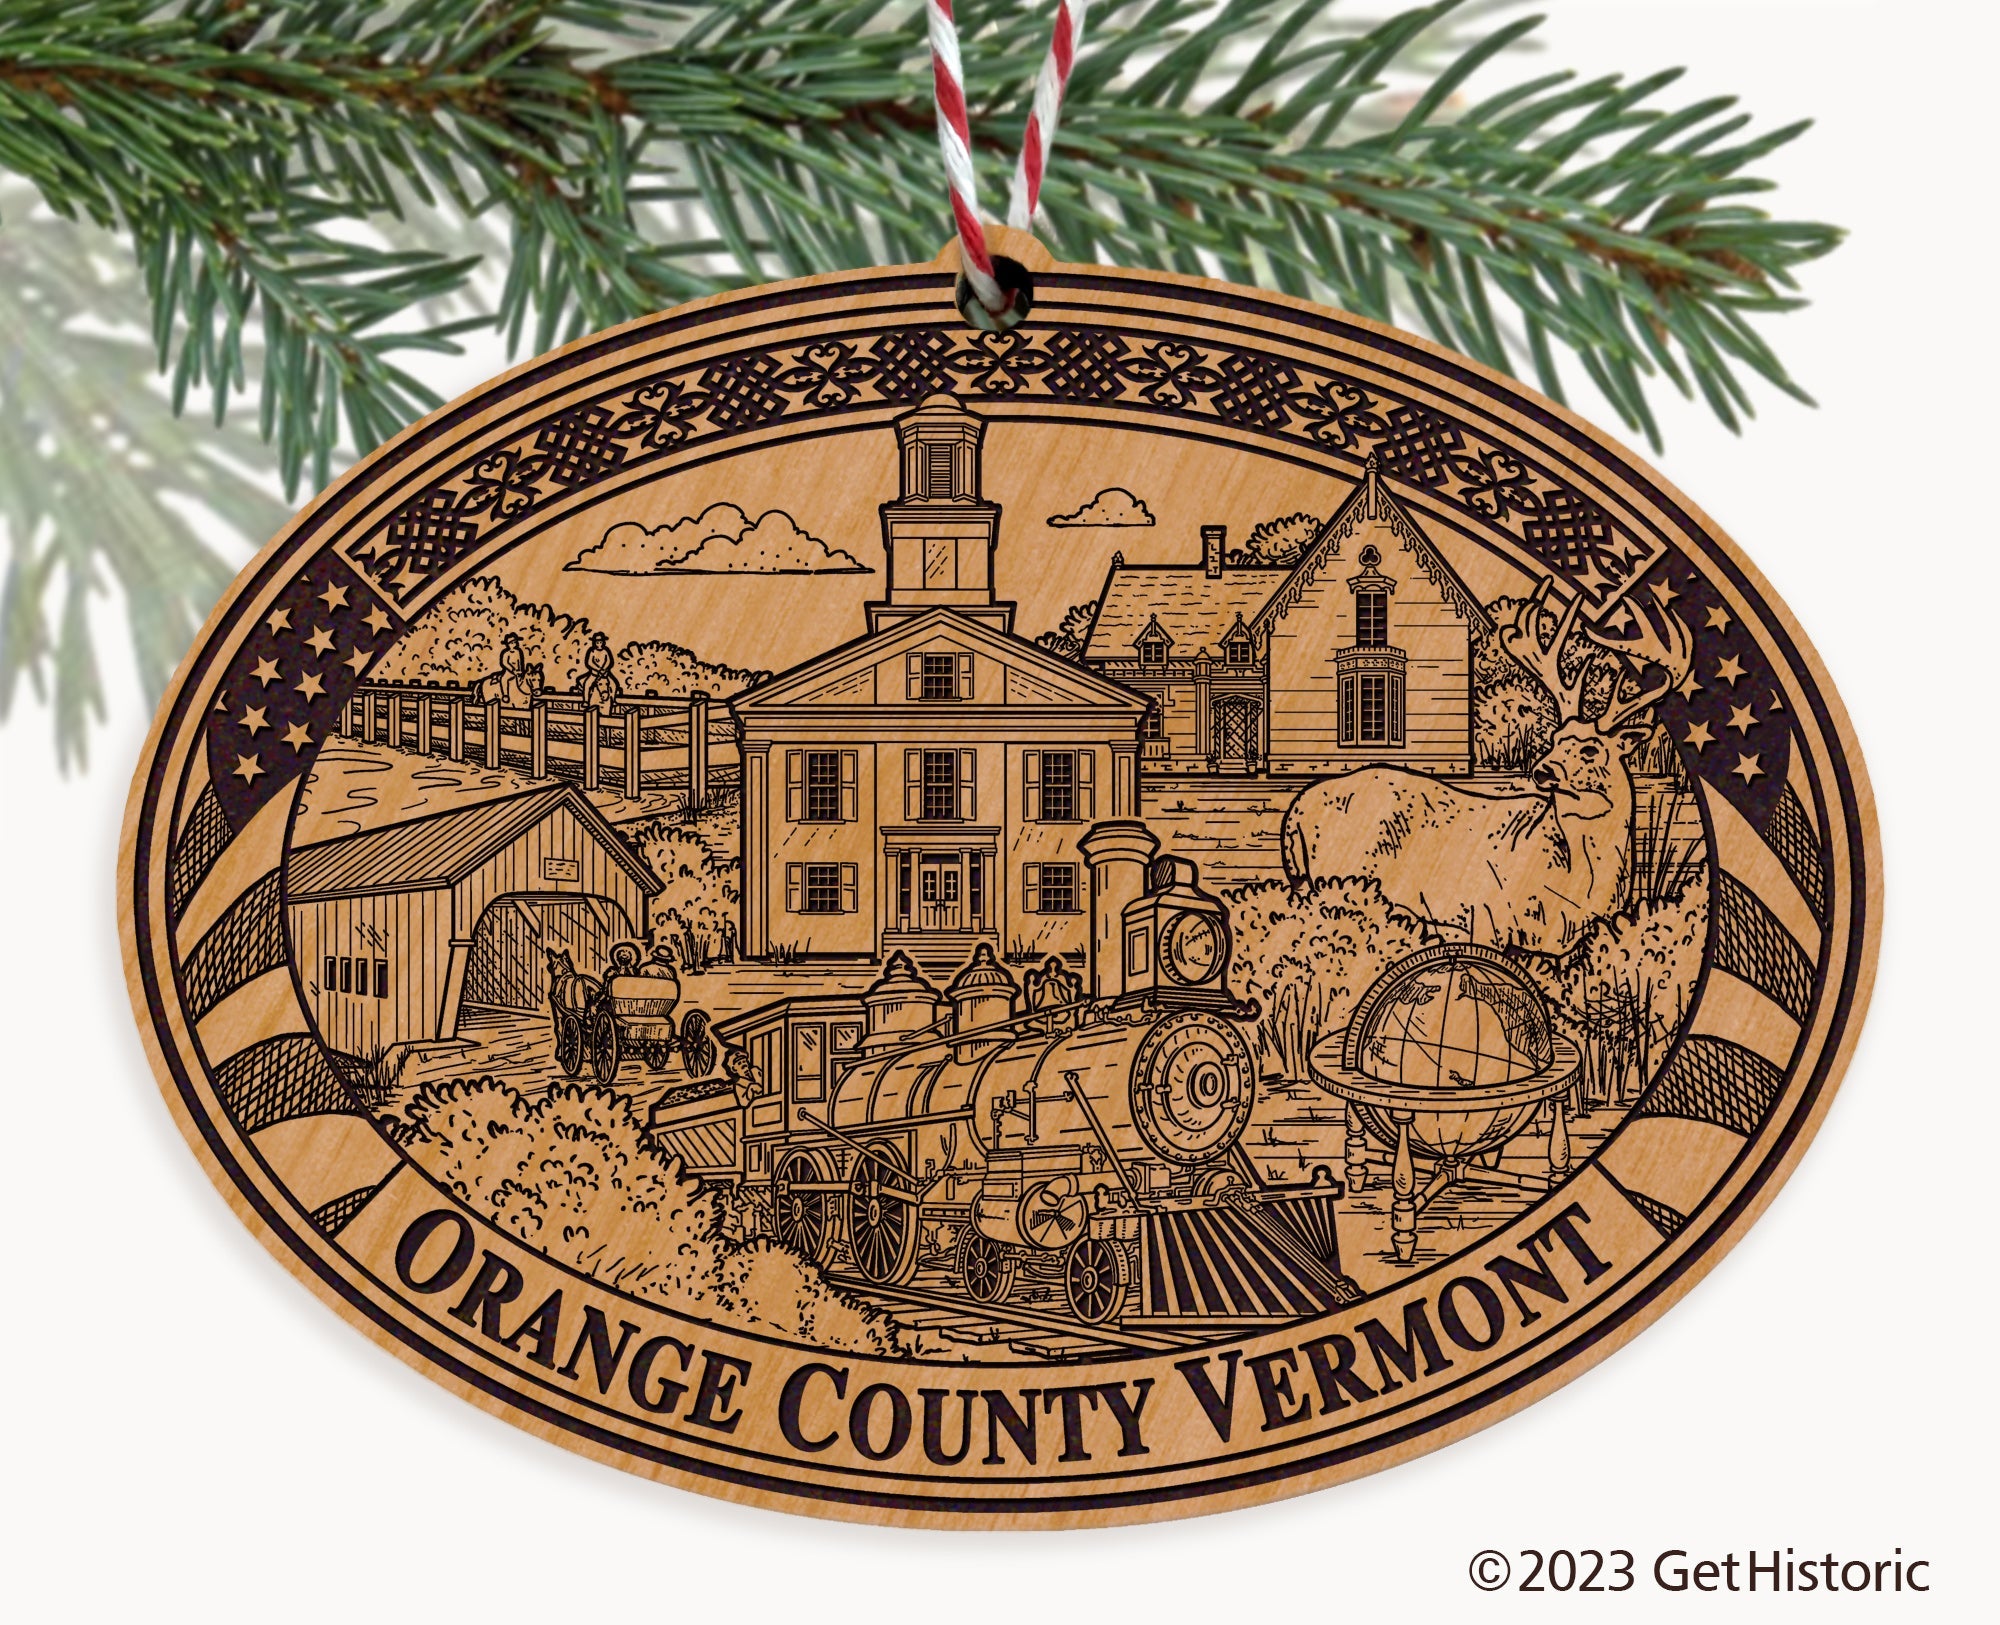 Orange County Vermont Engraved Natural Ornament